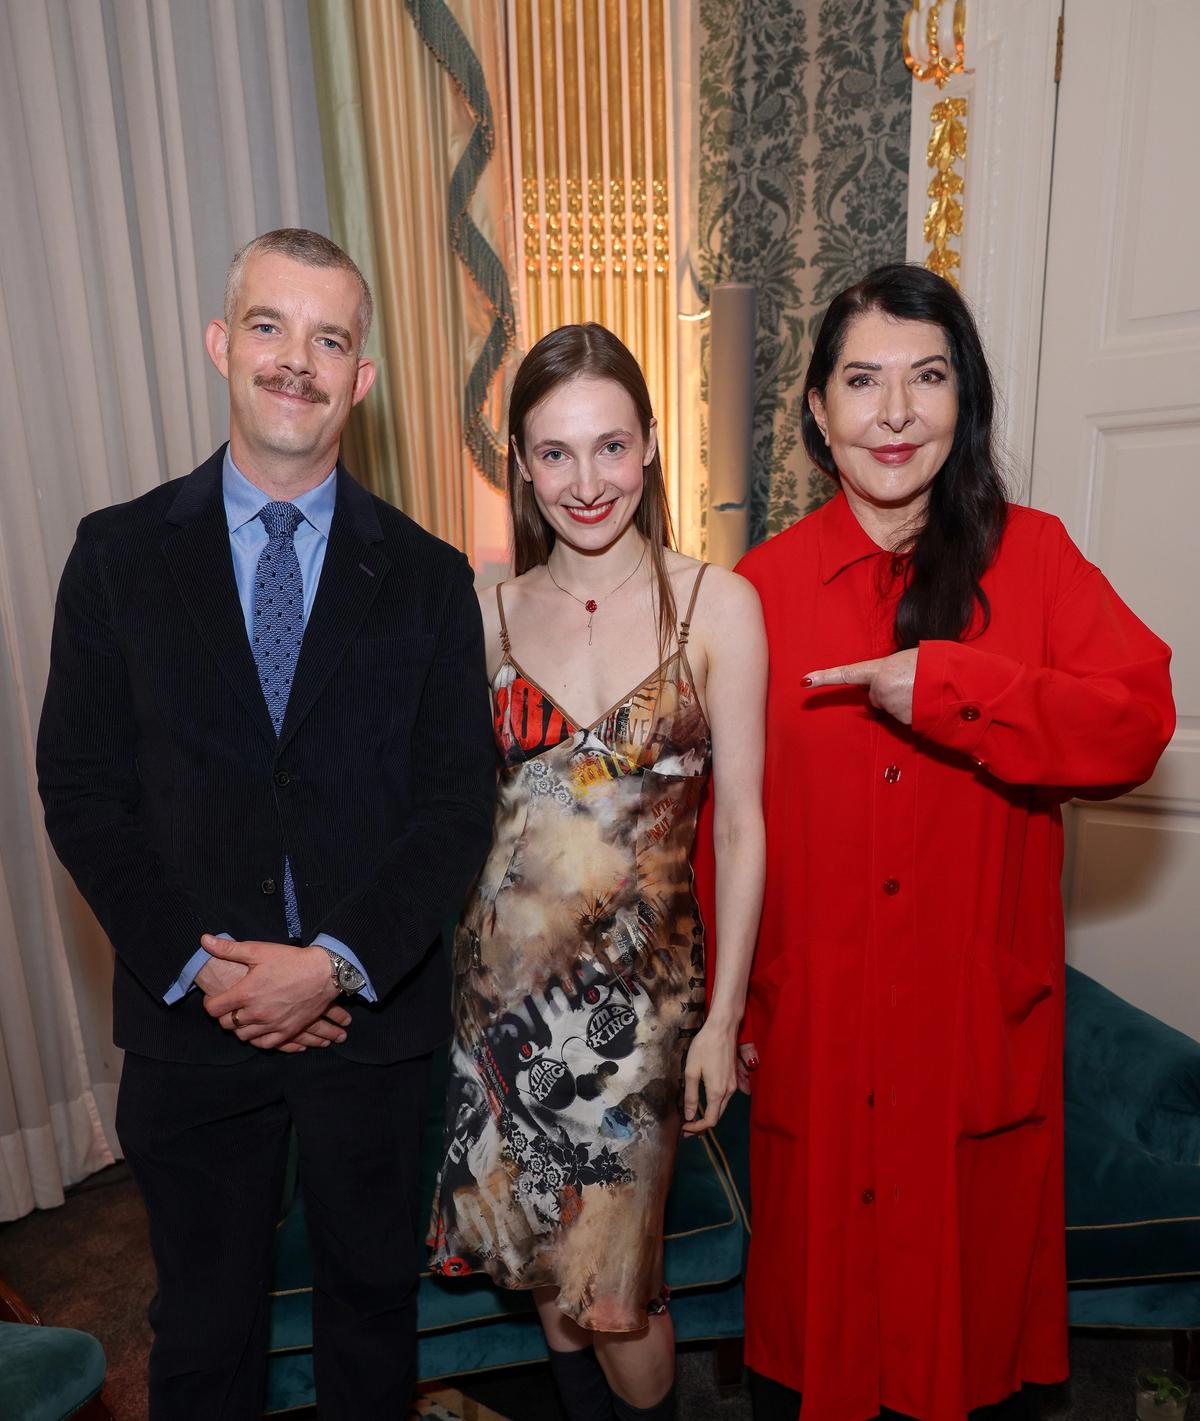 Russell Tovey, Daria Blum and Marina Abramović

courtesy Dave Benett/Getty Images for Claridge's